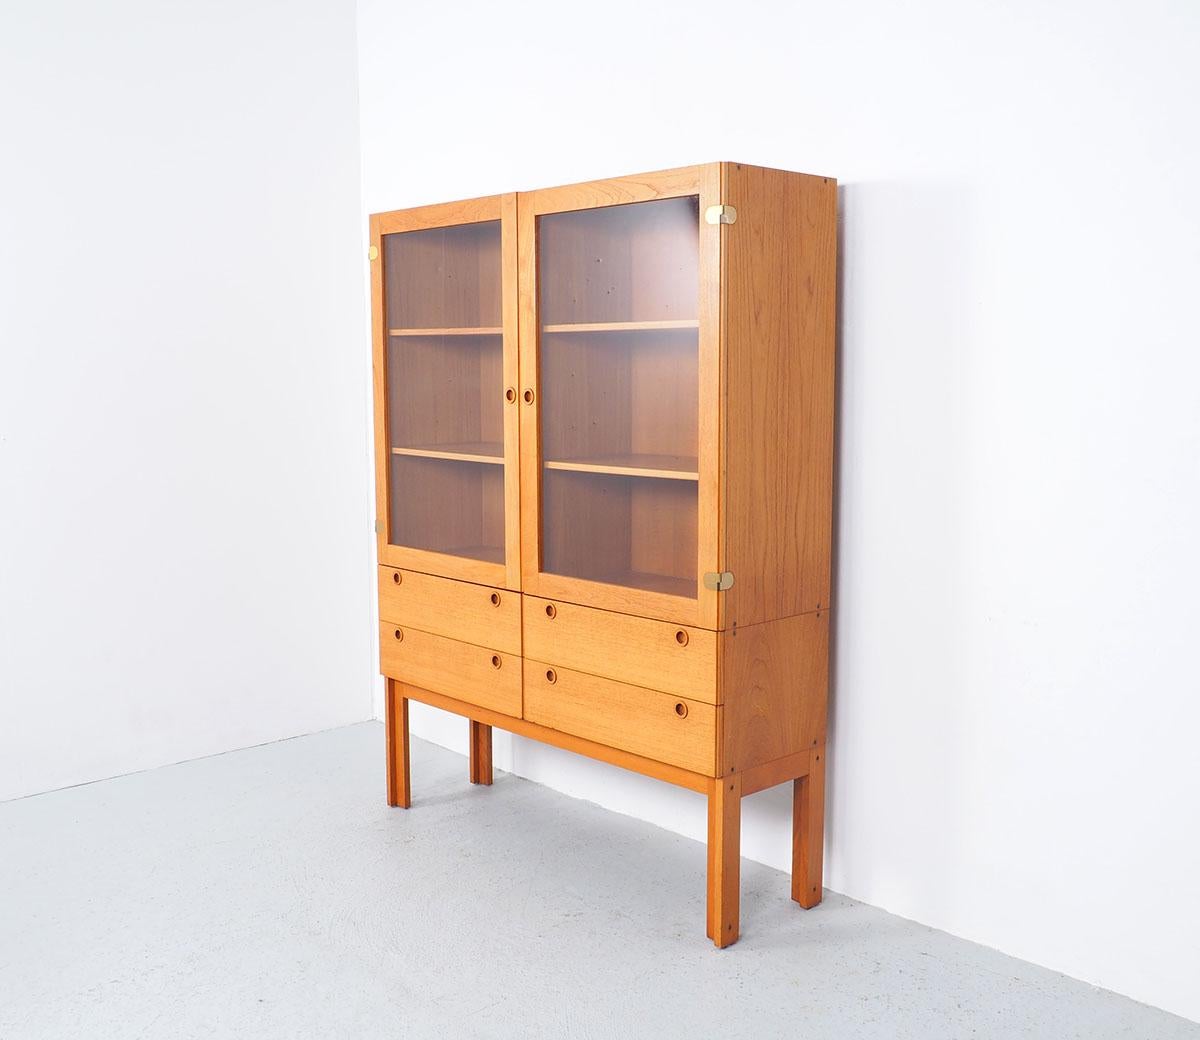 Beautiful sleek vintage display cabinet with drawer unit, produced in Denmark in the 1960s.

In the style of Børge Mogensen (for Karl Andersson & Sönern).

Possibly from the same designer or manufacturer. The cabinet is in a very good vintage